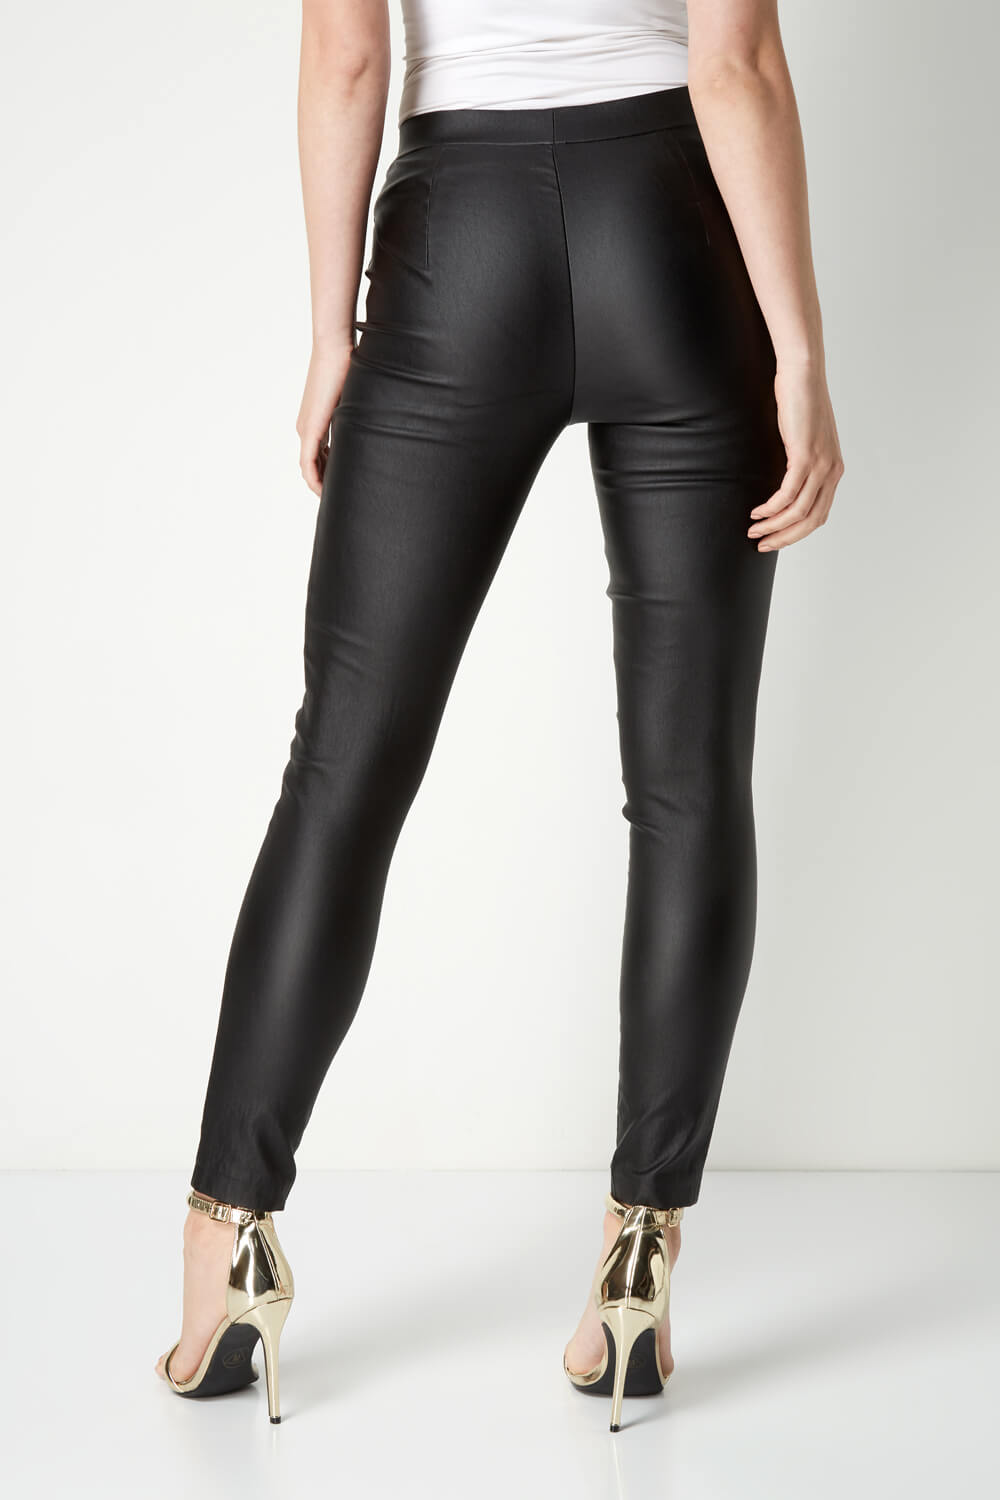 Black Pull On Faux Leather Trousers, Image 2 of 4